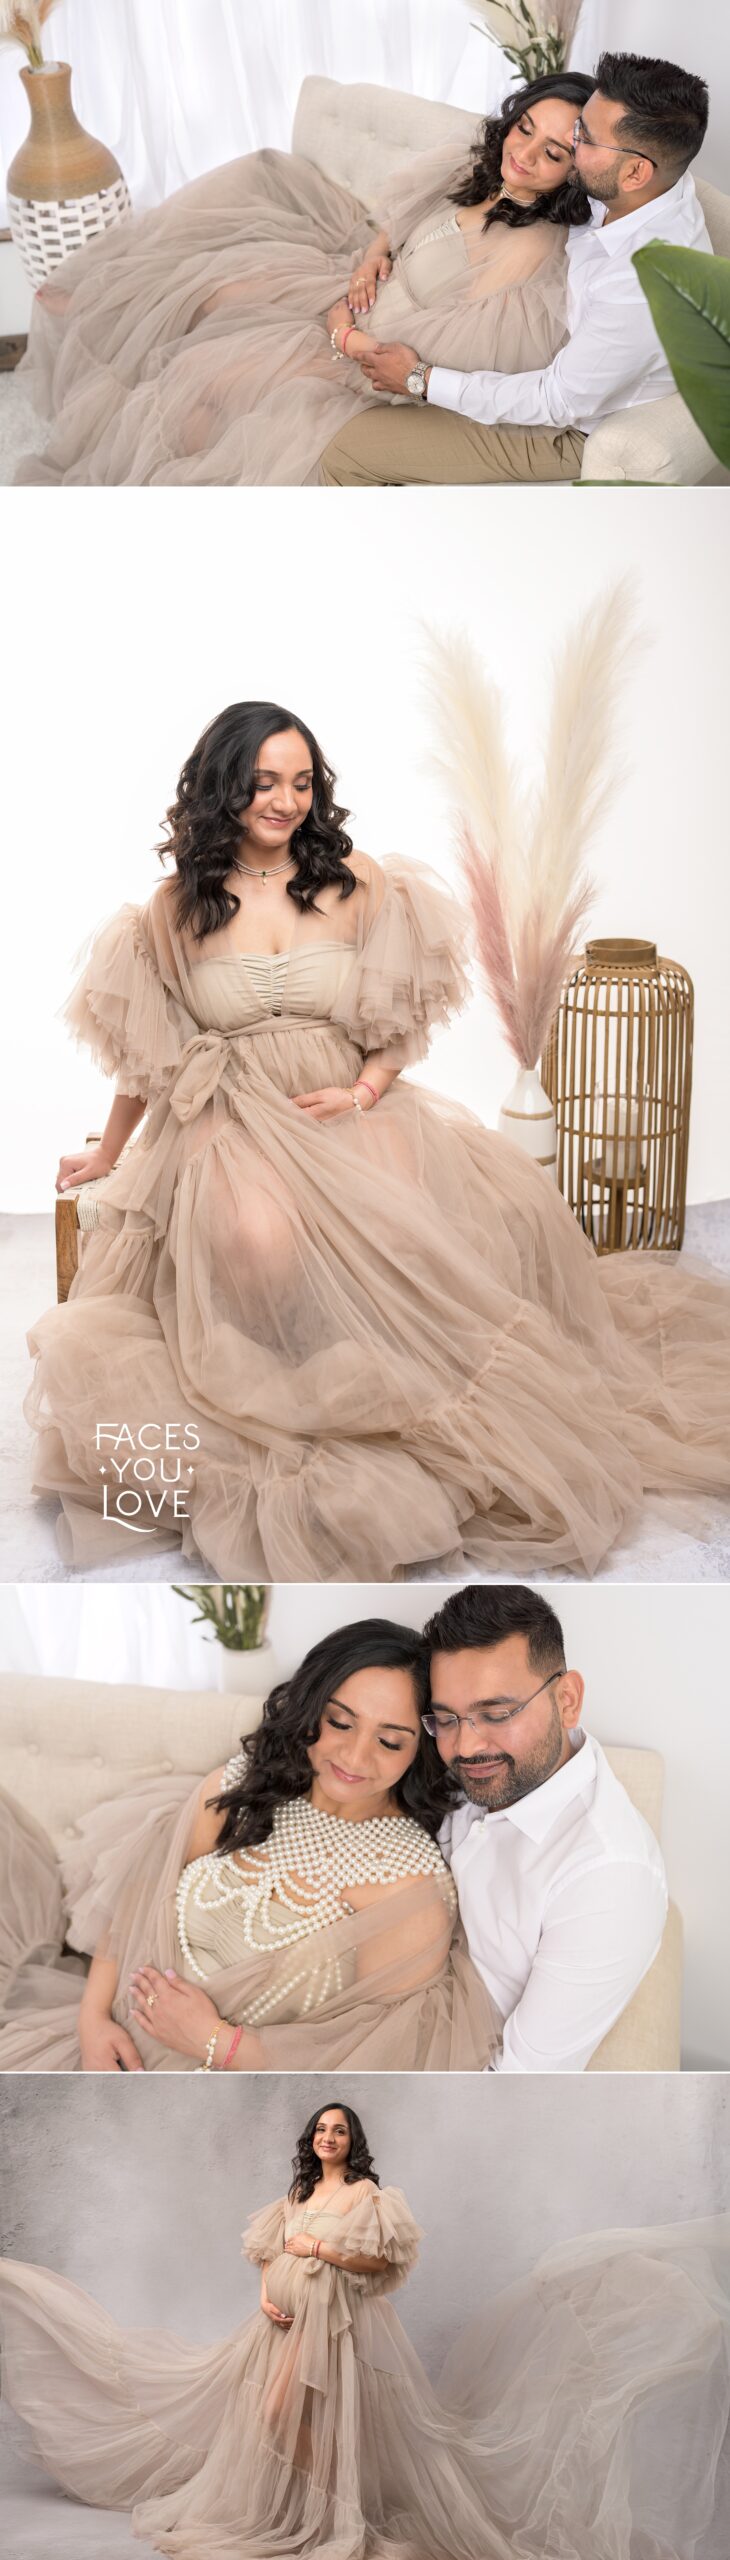 Collage of couple's maternity session in beige, photographed on a white background. The mother to be is wearing a white pearl necklace over a flowy, beige dress. Photographed in studio at Faces You Love located in Overland Park.